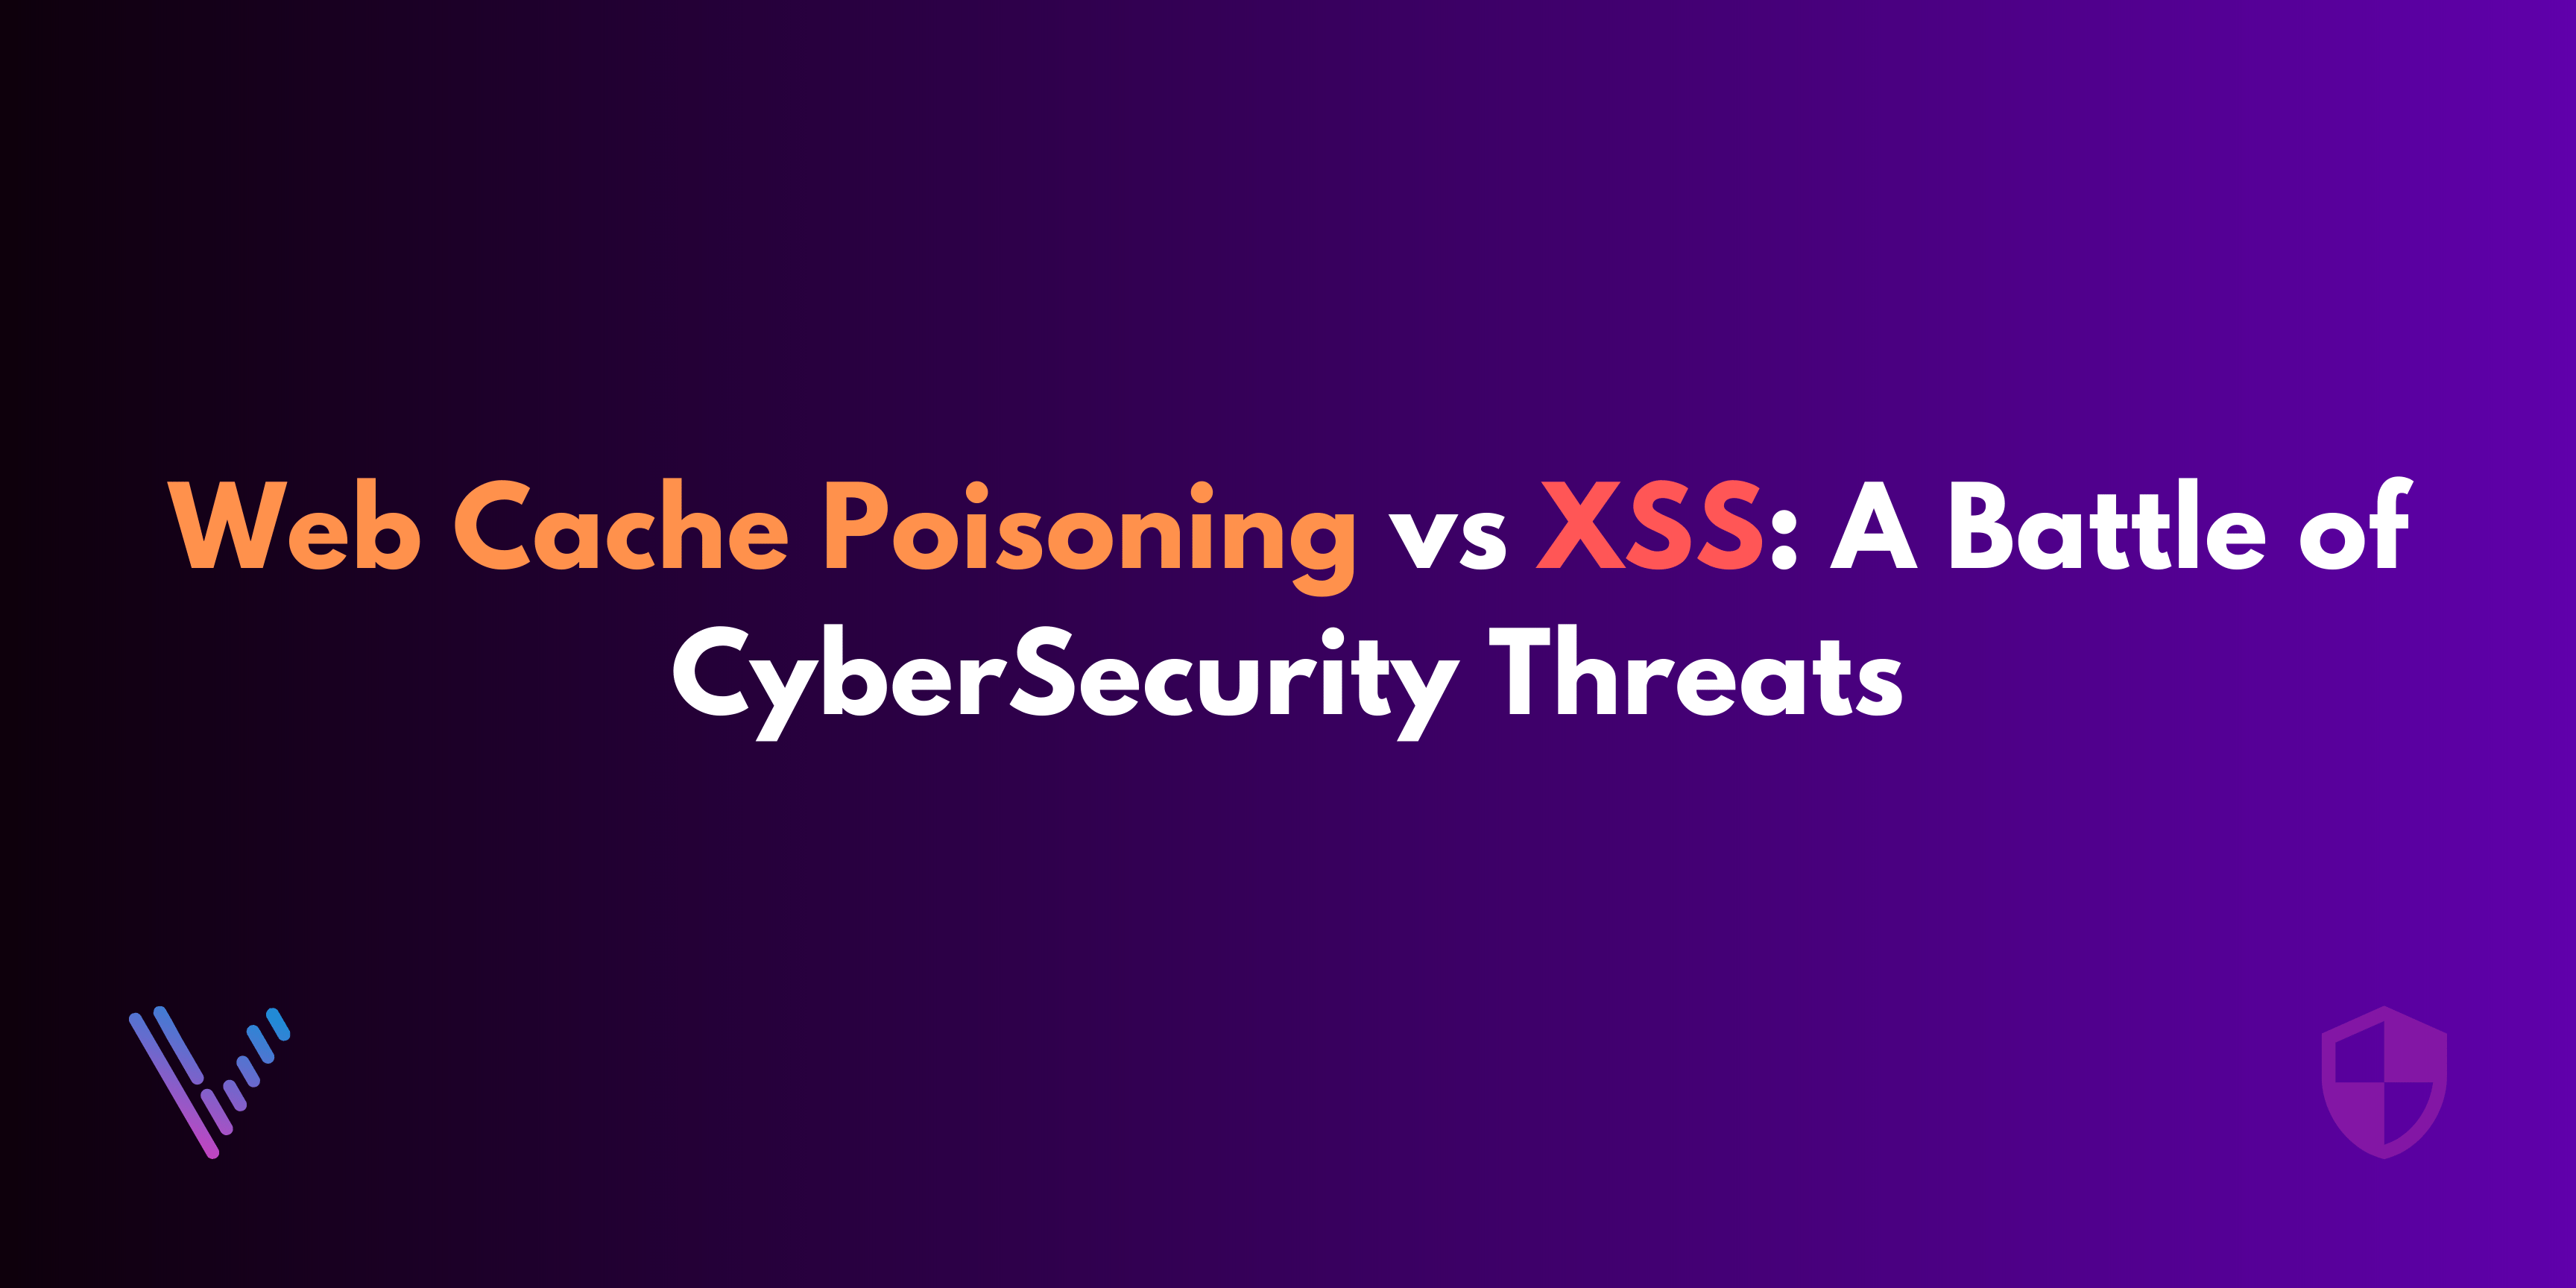 Web Cache Poisoning vs XSS: A Battle of CyberSecurity Threats